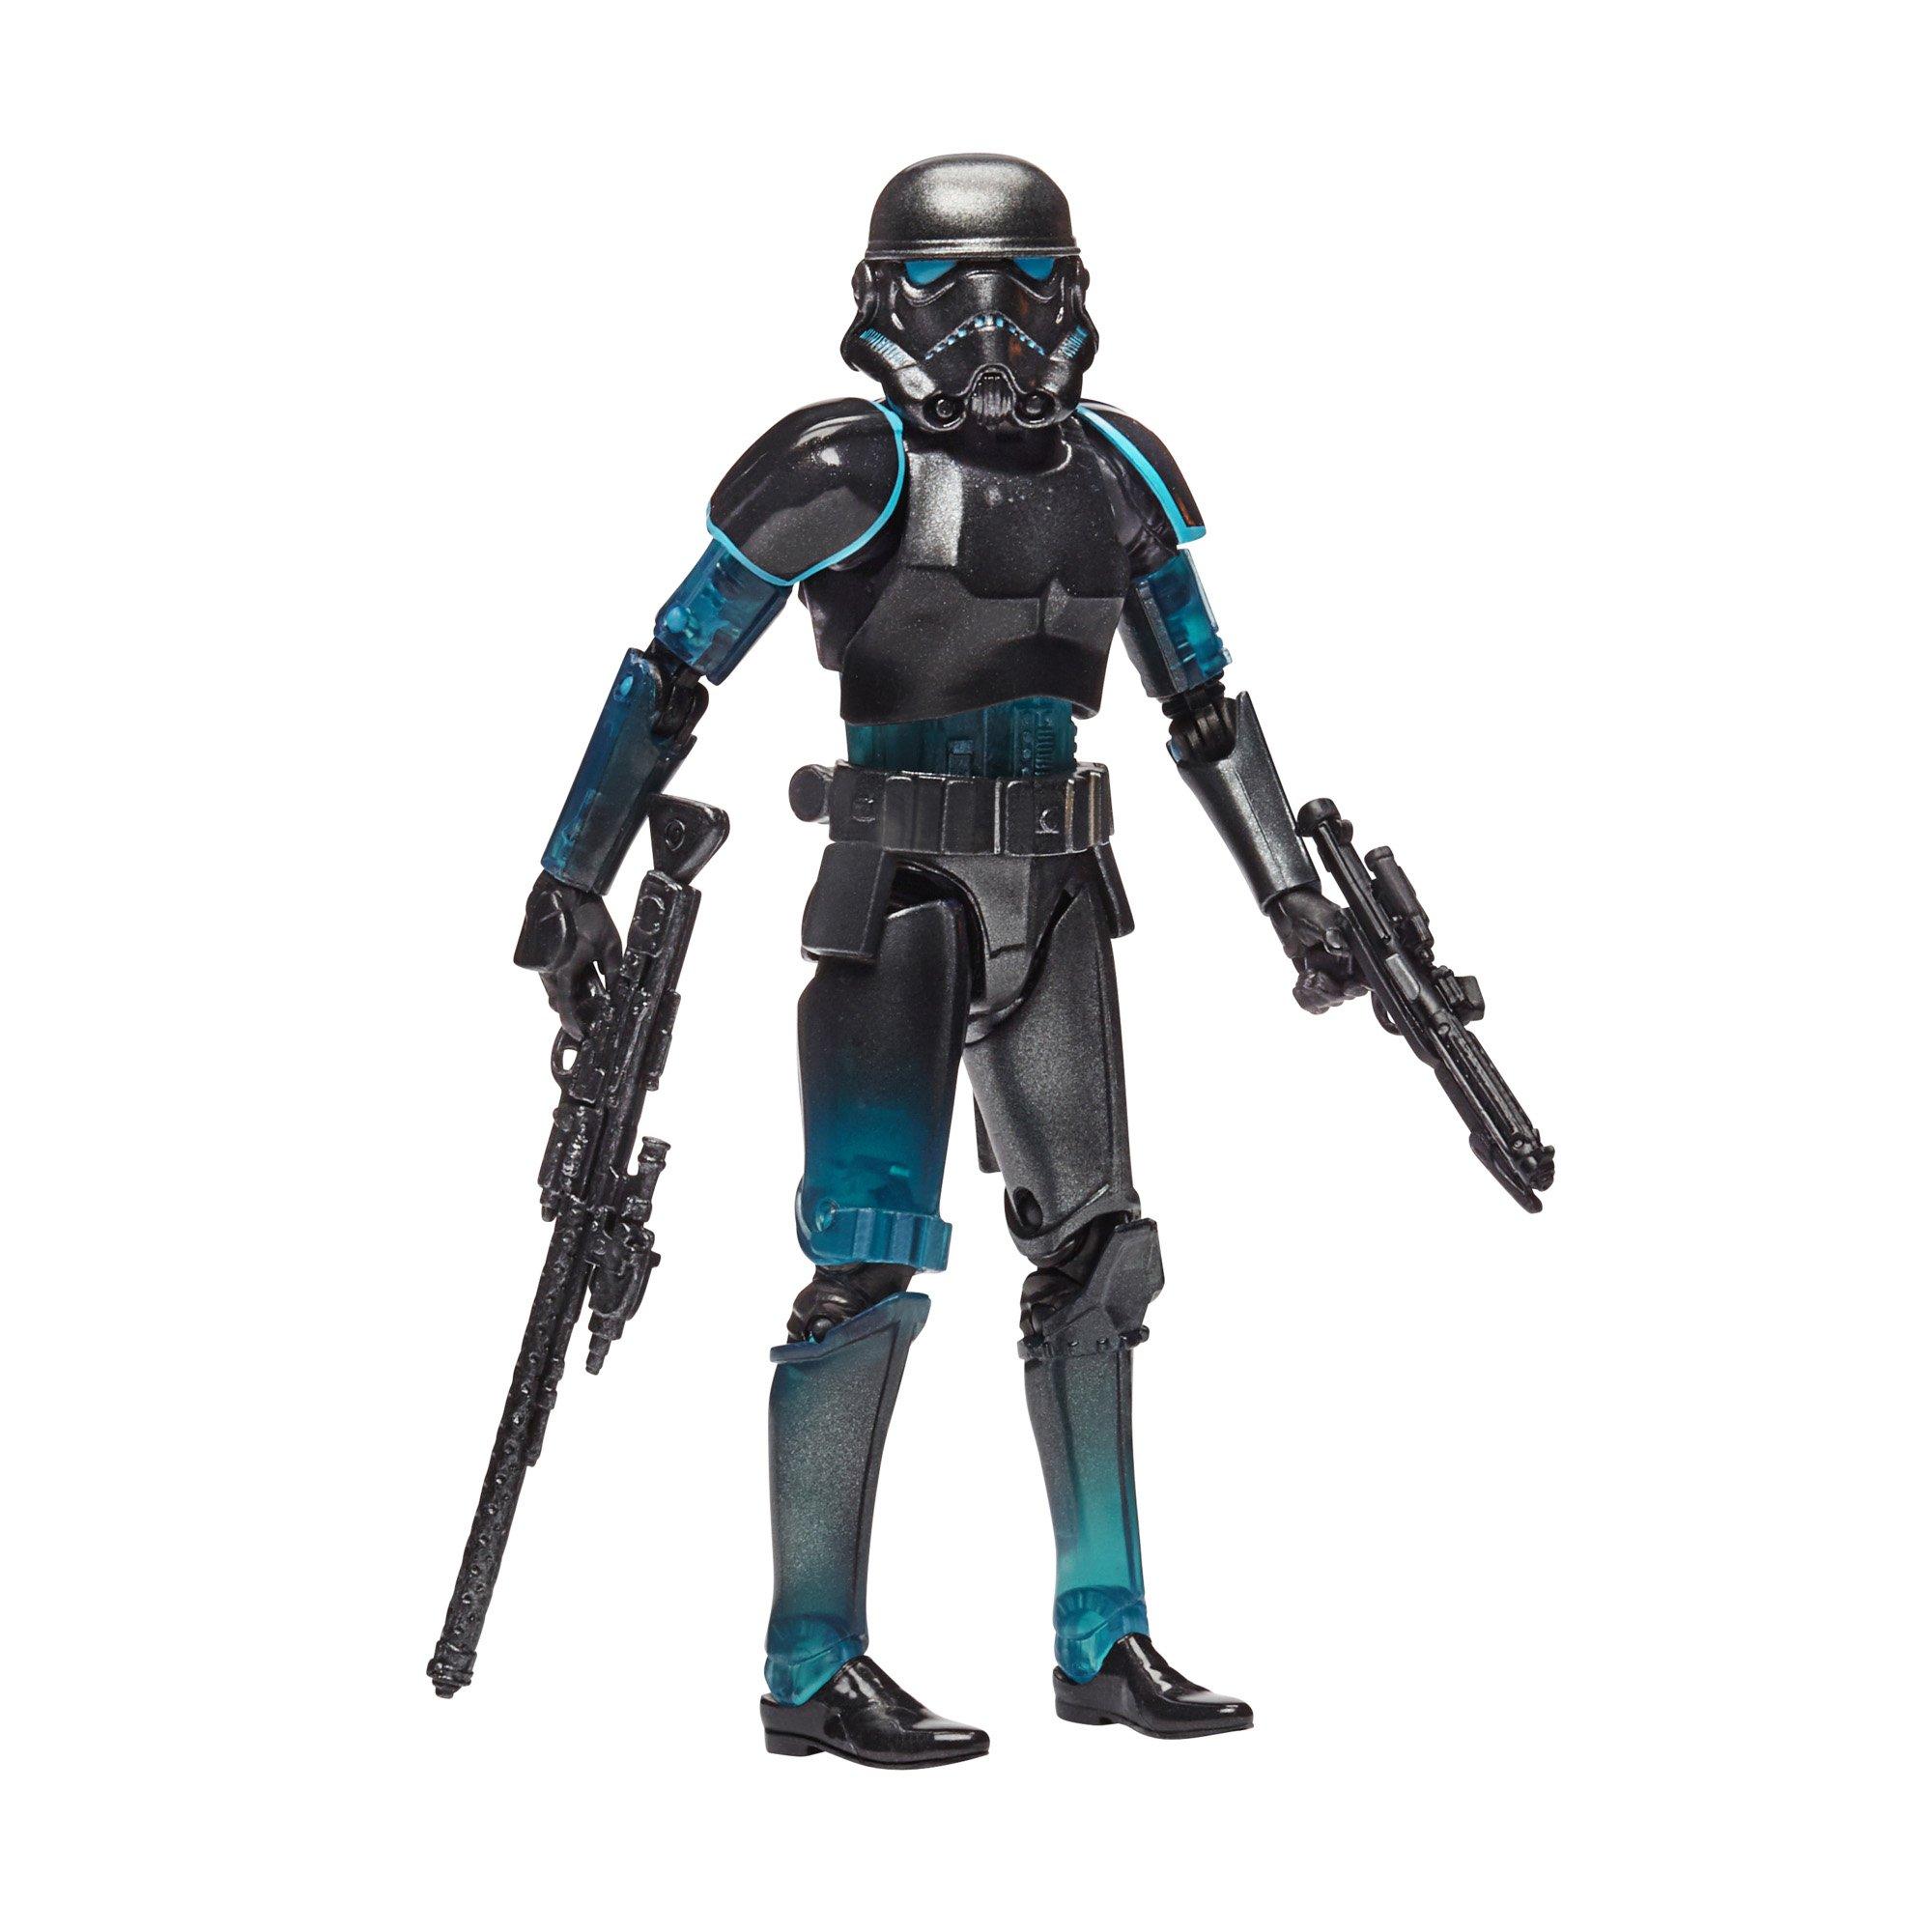 Hasbro Star Wars: The Black Series The Force Unleashed Shadow Stormtrooper 6-in Action Figure GameStop Exclusive